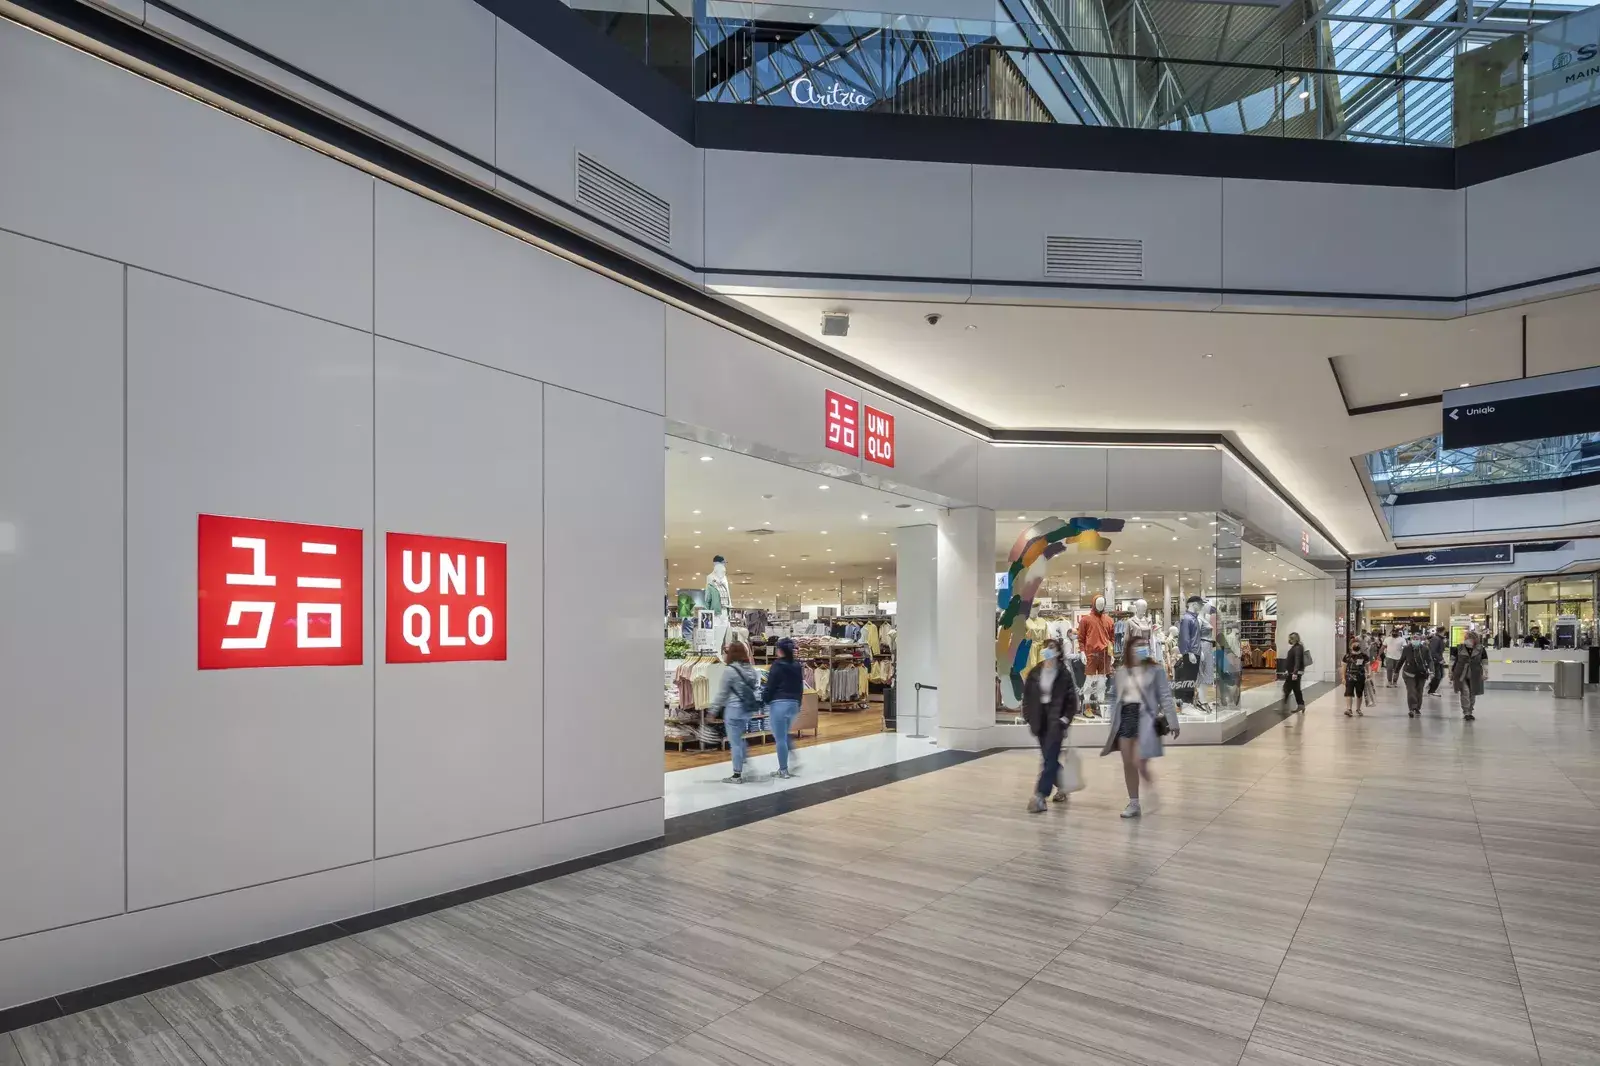 UNIQLO is opening its second Quebec store at Carrefour Laval